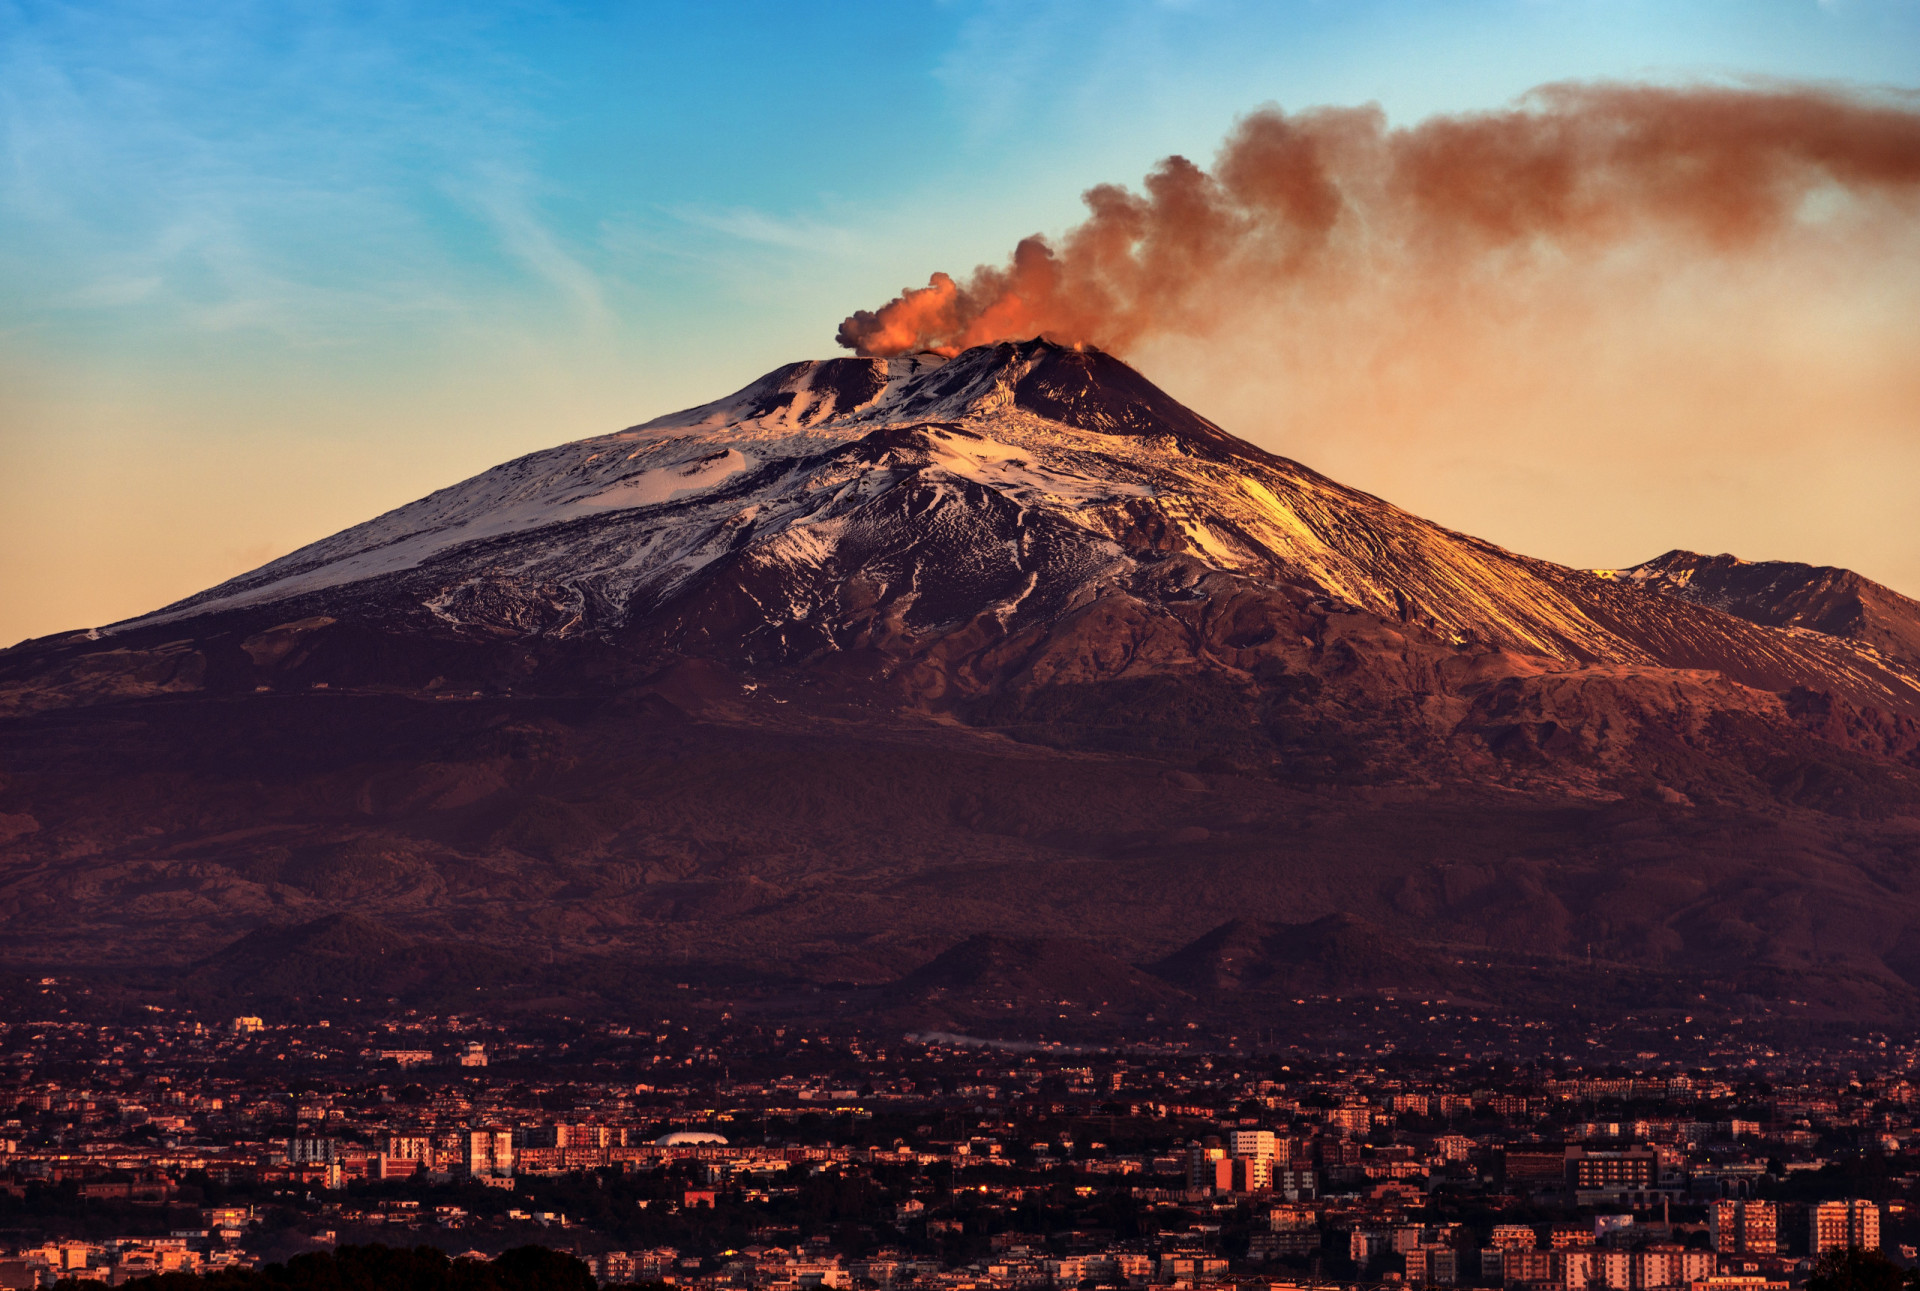 <p>Mount Etna on Sicily is one of Europe's most dramatic active volcanoes. Located on the island's east coast between the cities of Messina and Catania, Etna has been blowing its top since antiquity. It last erupted as recently as November 2023.</p><p>You may also like:<a href="https://www.starsinsider.com/n/220053?utm_source=msn.com&utm_medium=display&utm_campaign=referral_description&utm_content=701215en-us"> Unprofessional stars involved in spats at work</a></p>